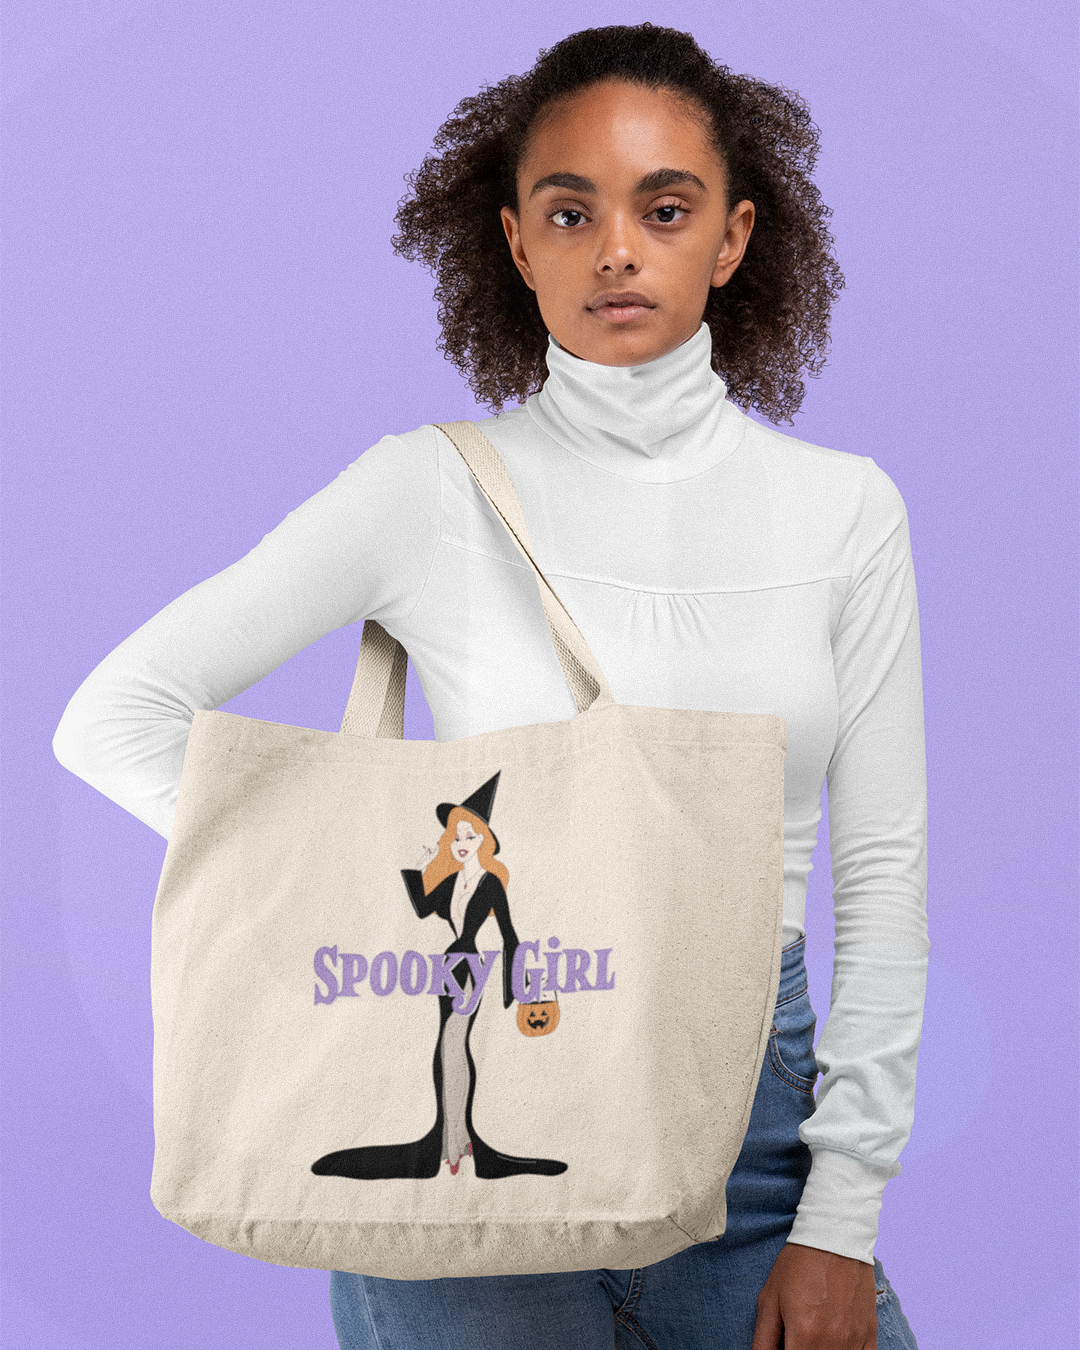 Spooky Girl Pin Up Tote Bag - Pin Up Witch Tote Bag - Spooky Sexy Halloween Shopper Tote Bag - Spooky Girl Pin Up Halloween Tote Bag